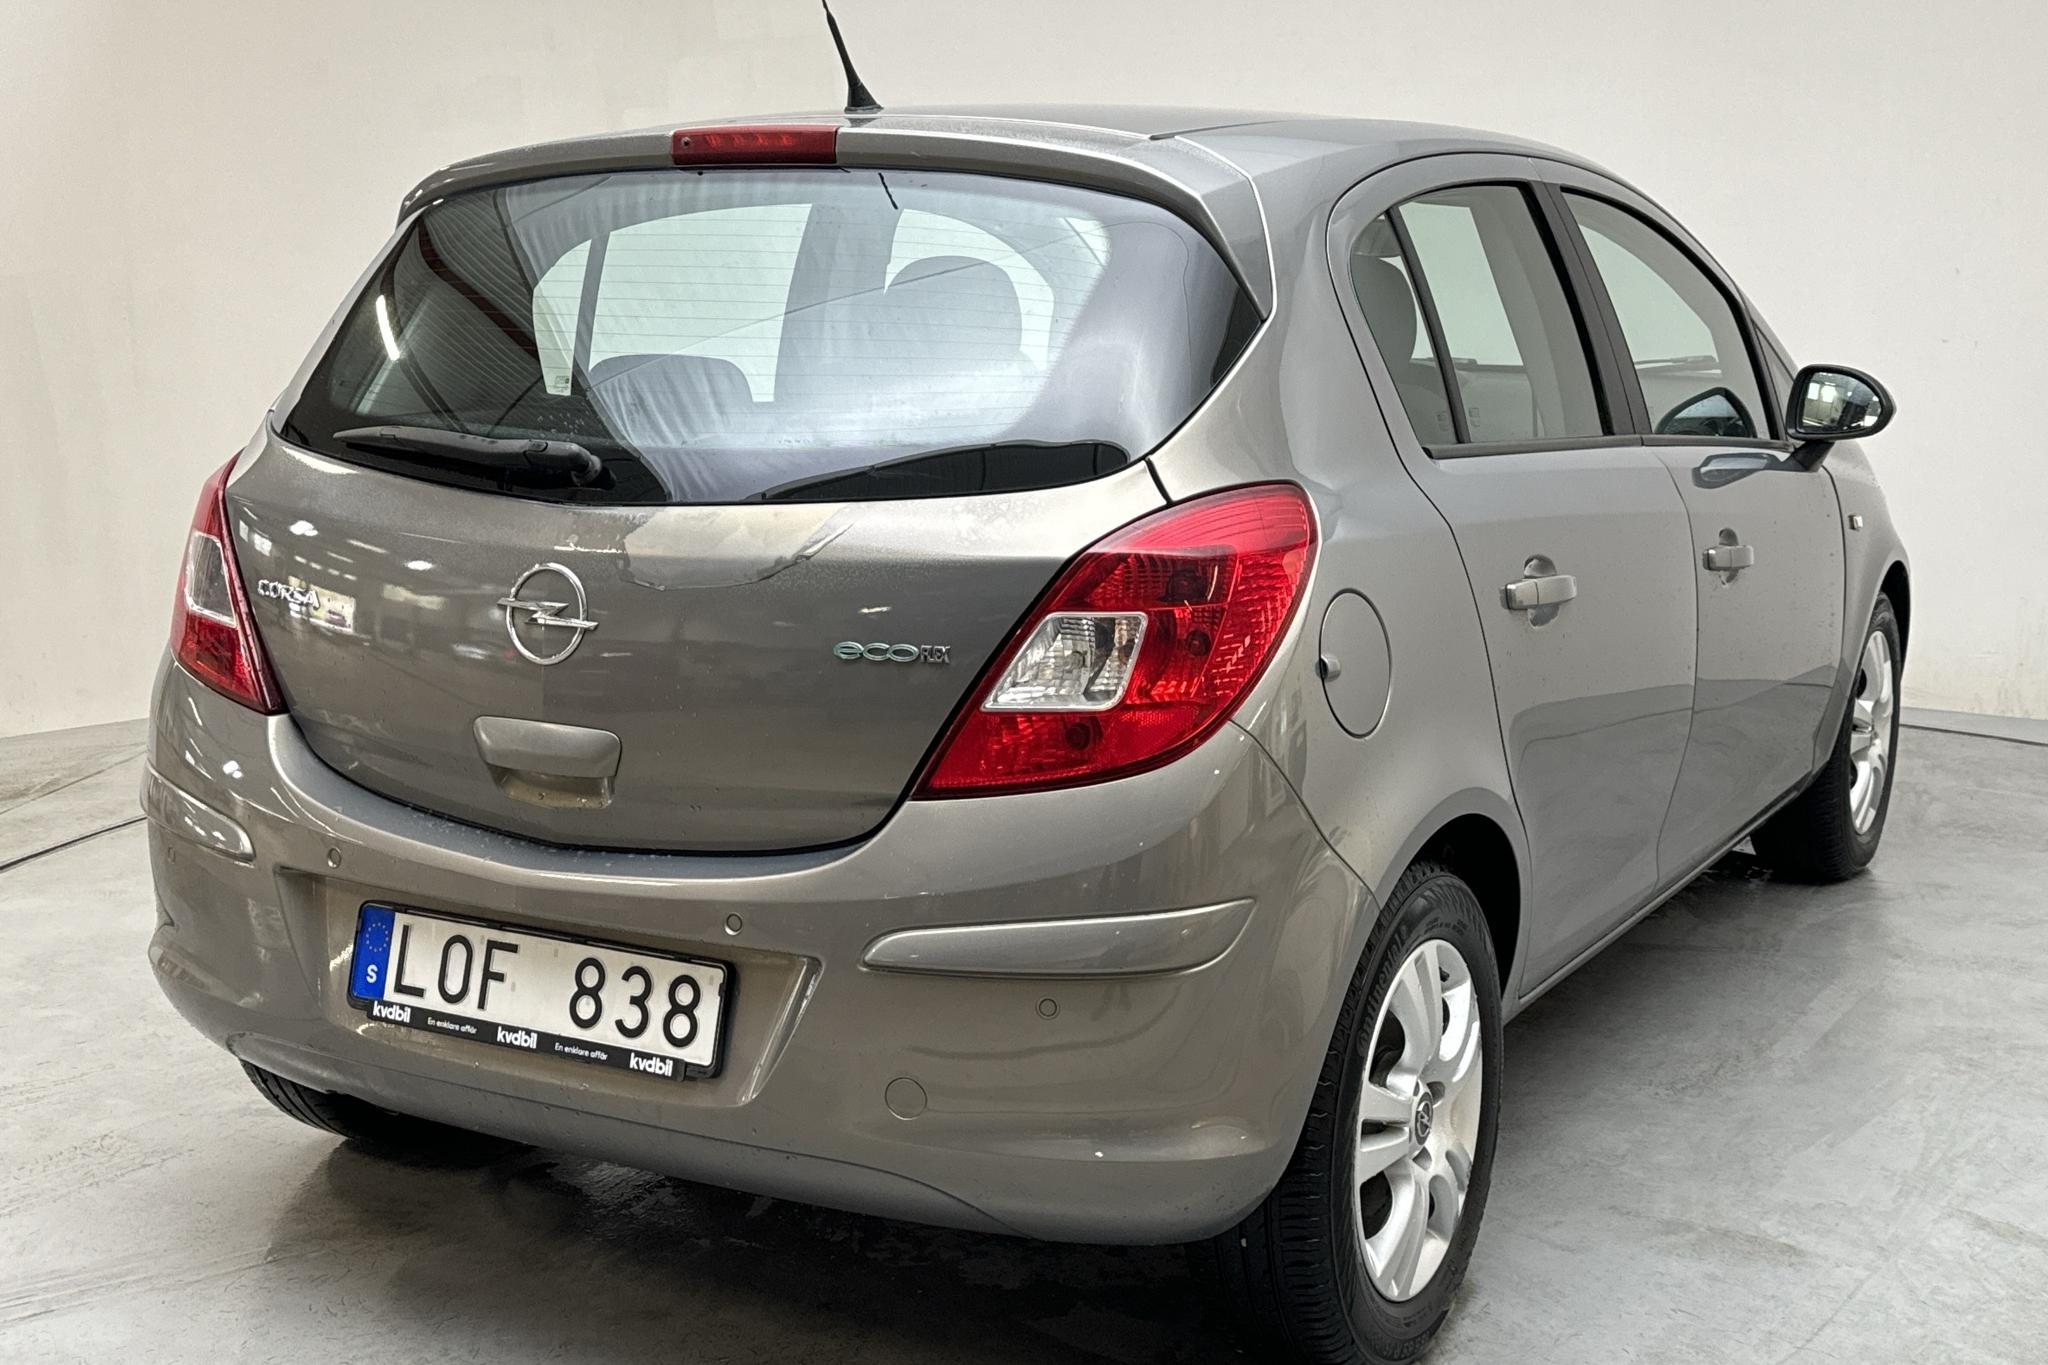 Opel Corsa 1.2 Twinport 5dr (85hk) - 27 810 km - Automatic - brown - 2011